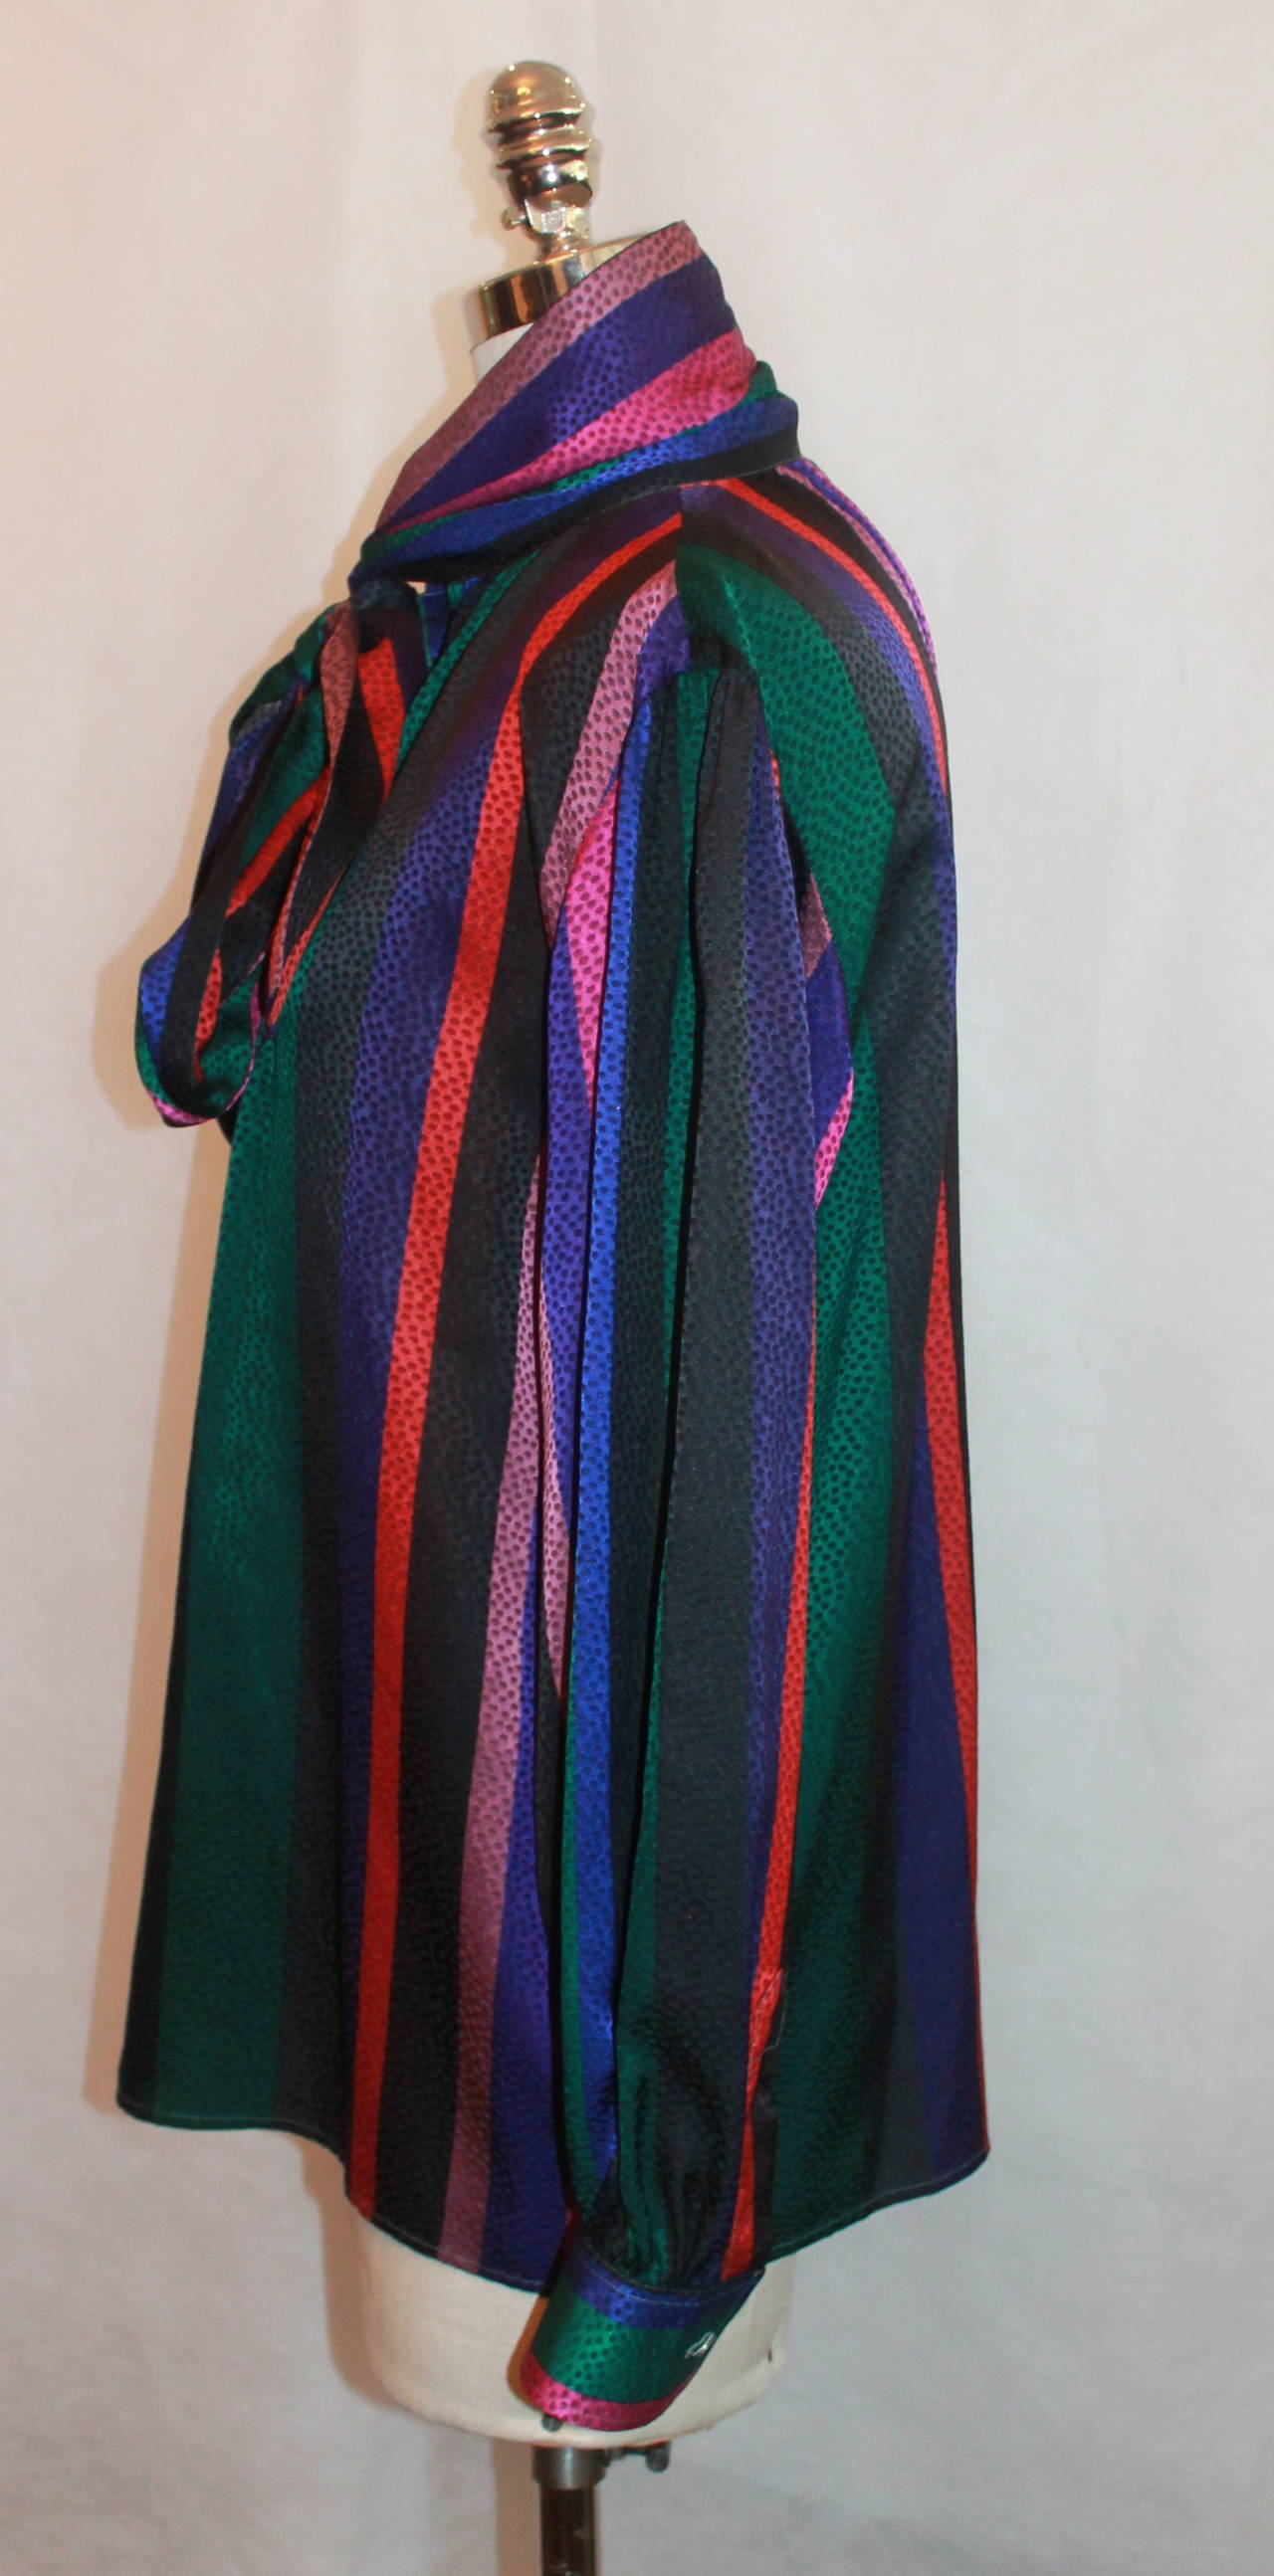 YSL 1960's Vintage Multi-Color Silk Blouse - L. This top is in excellent vintage condition with light wear. It is loose and has a neck tie. The print is striped with dots and has purples, pinks, blues, greens, and reds.

Measurements:
Bust- up to